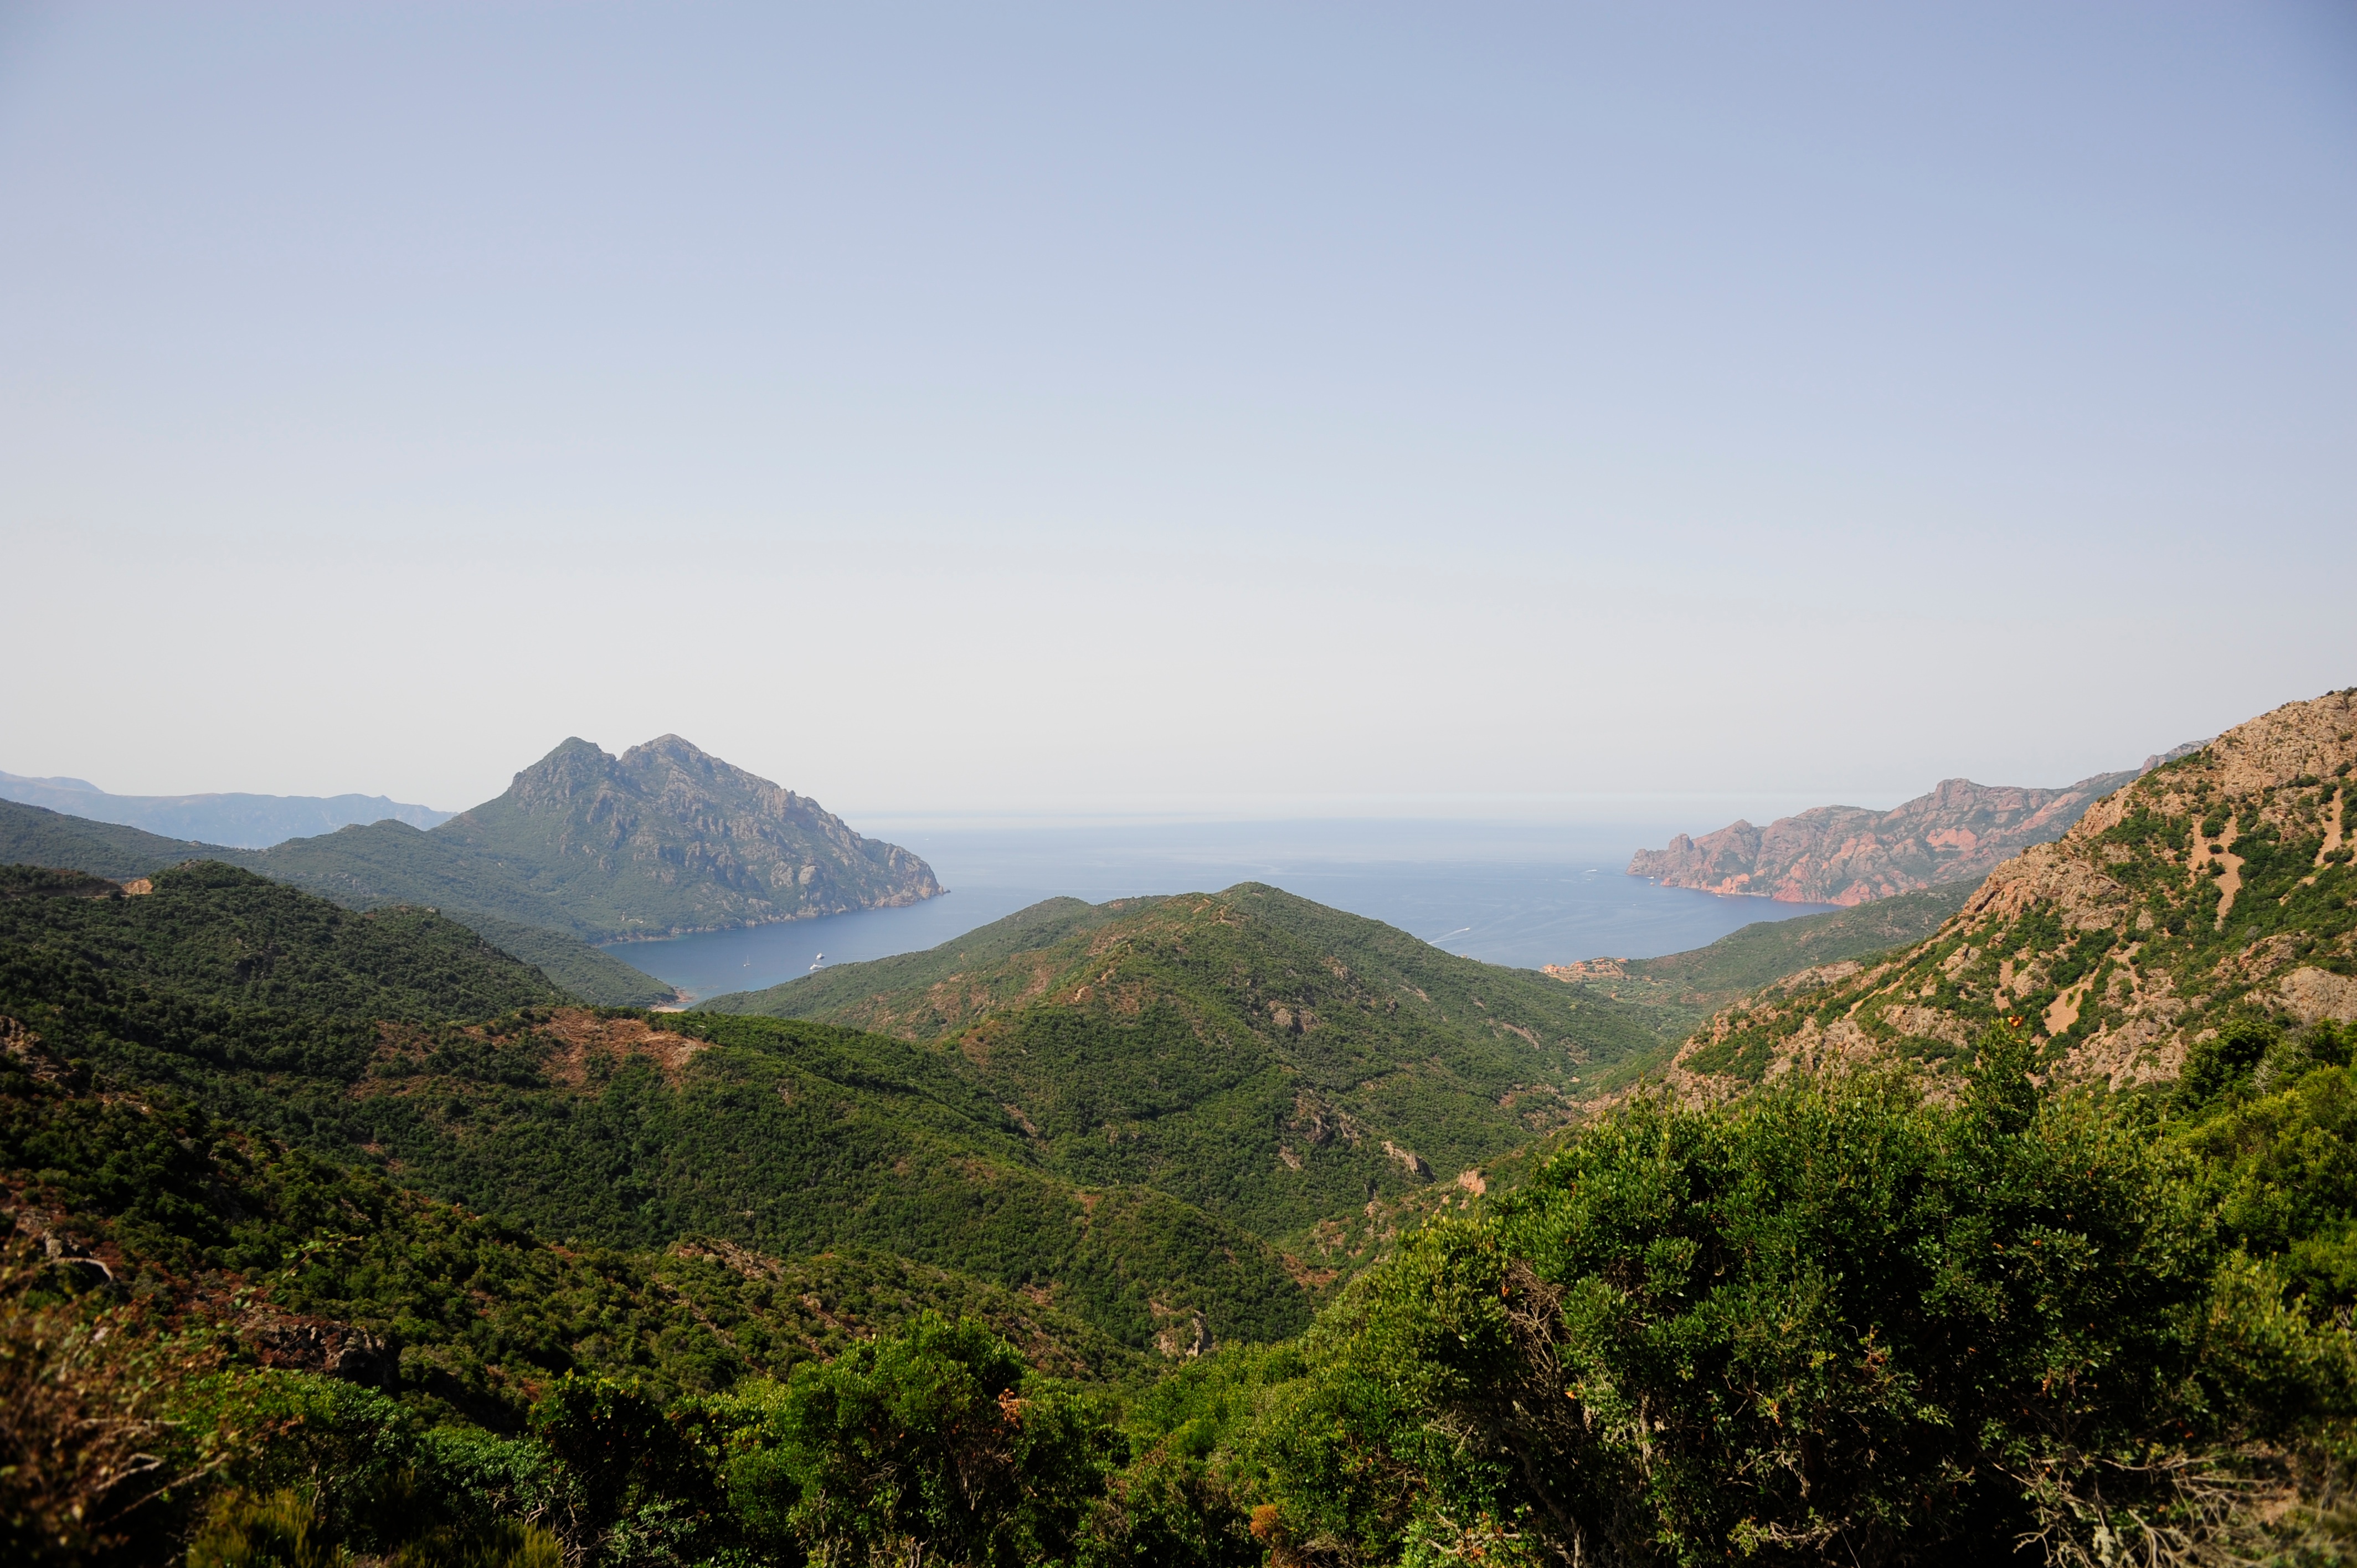 Mountains on the coast of the ocean with forests